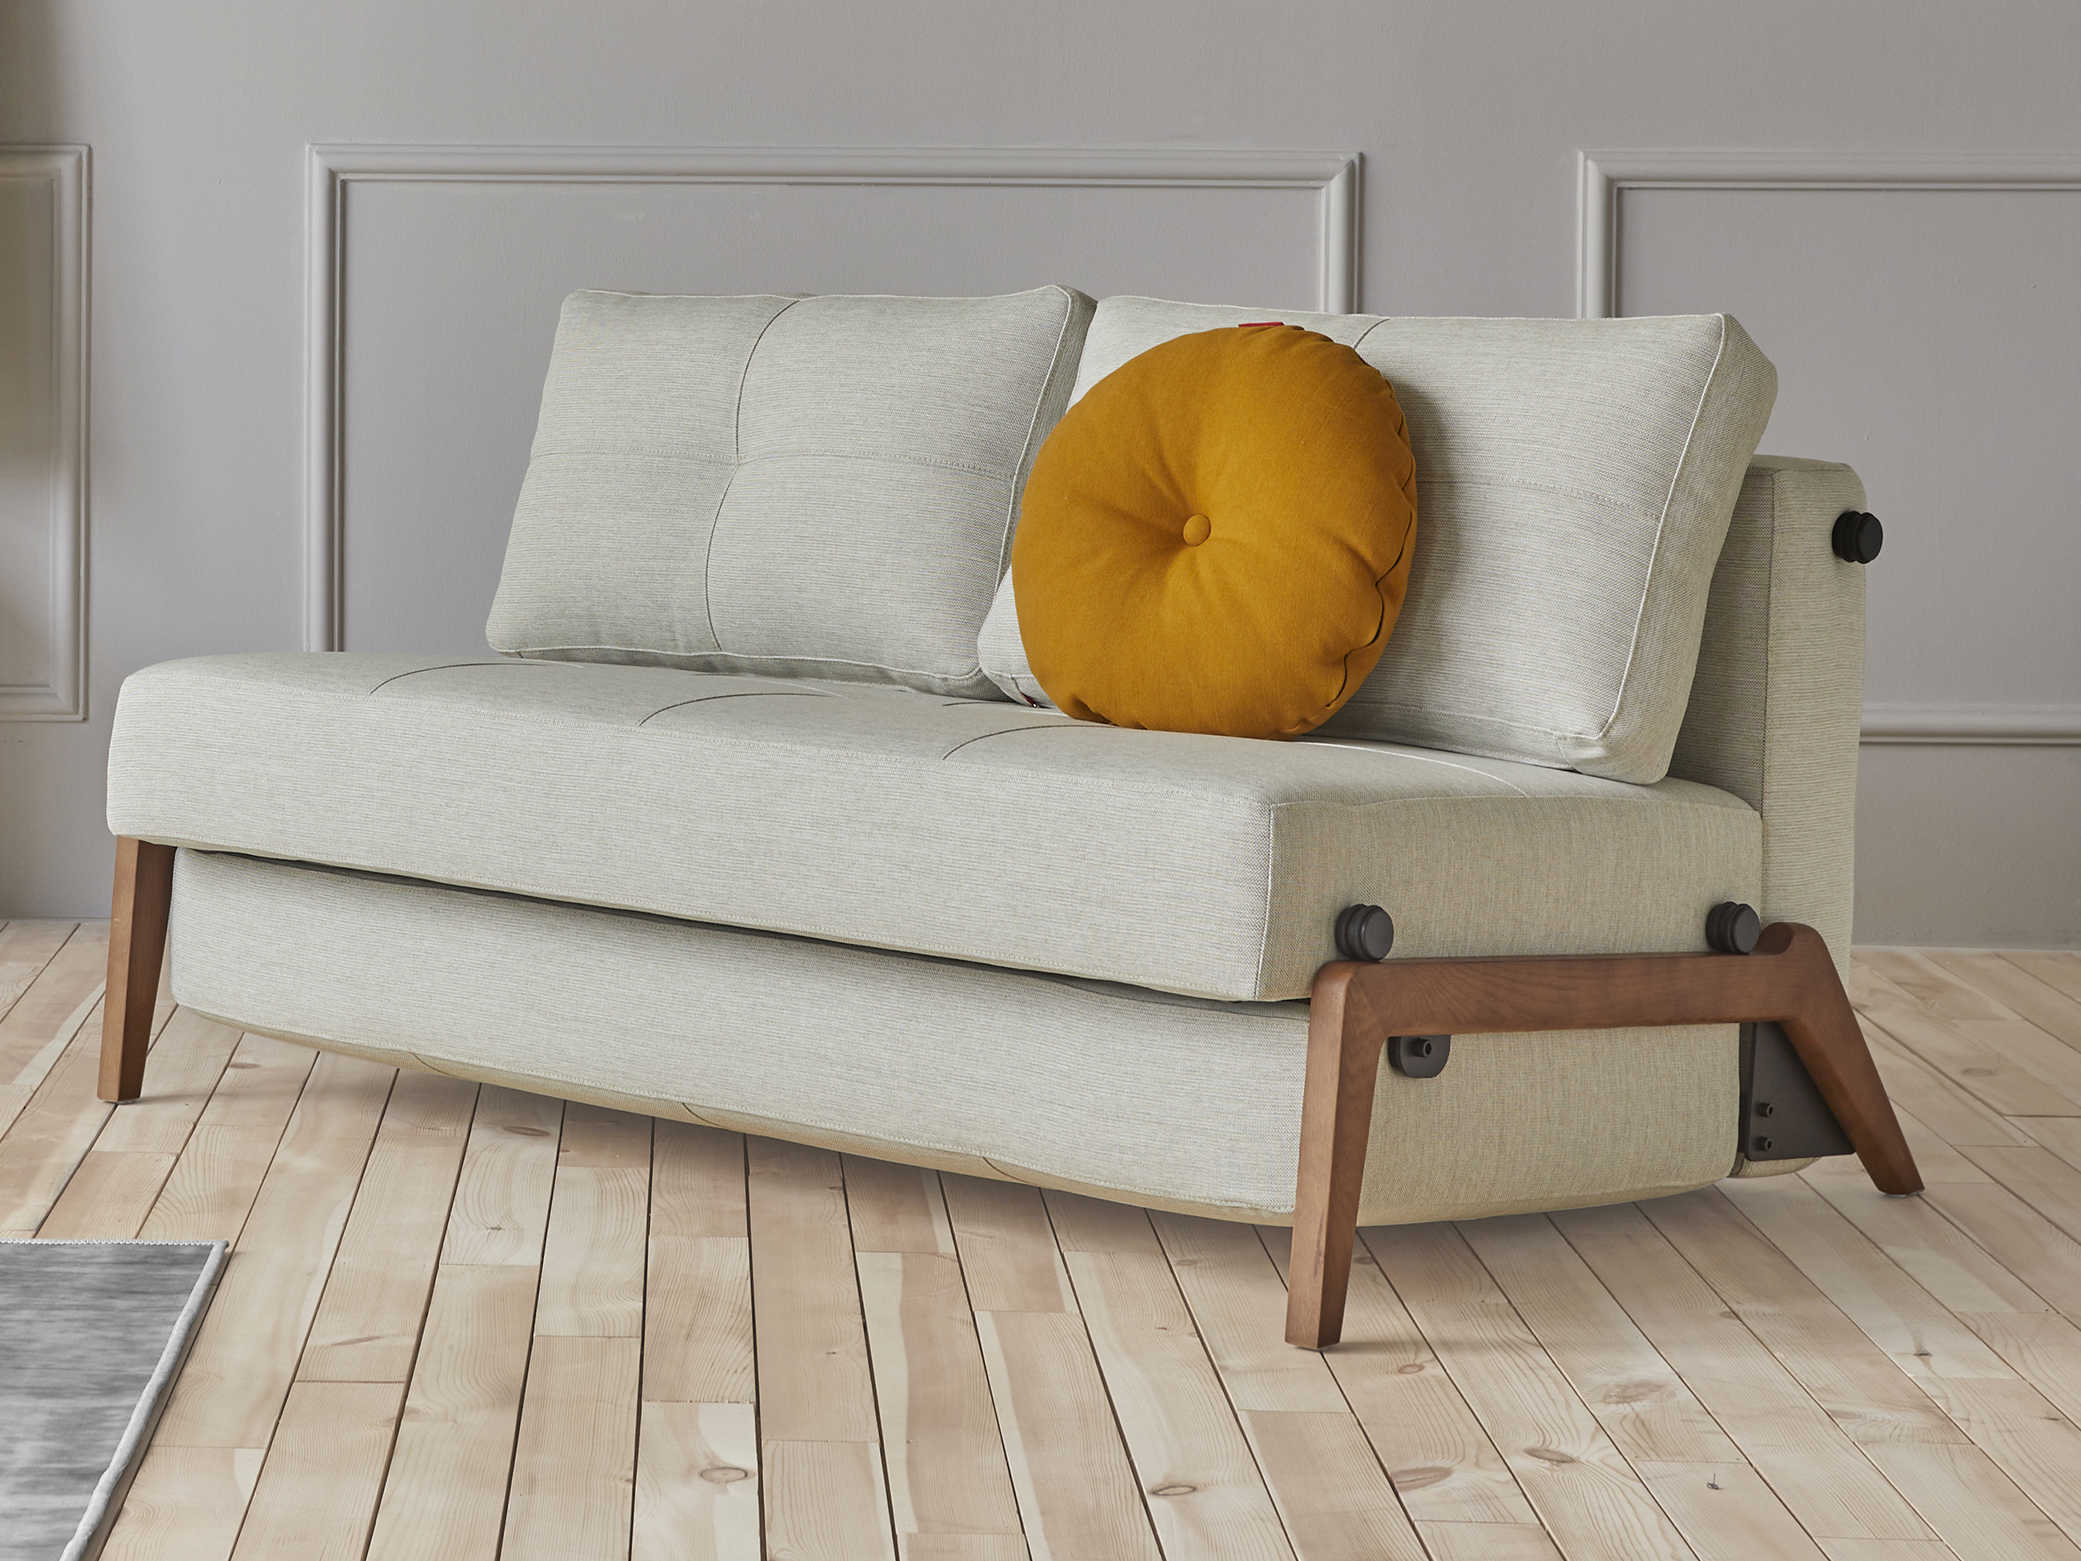 cubed sofa bed review